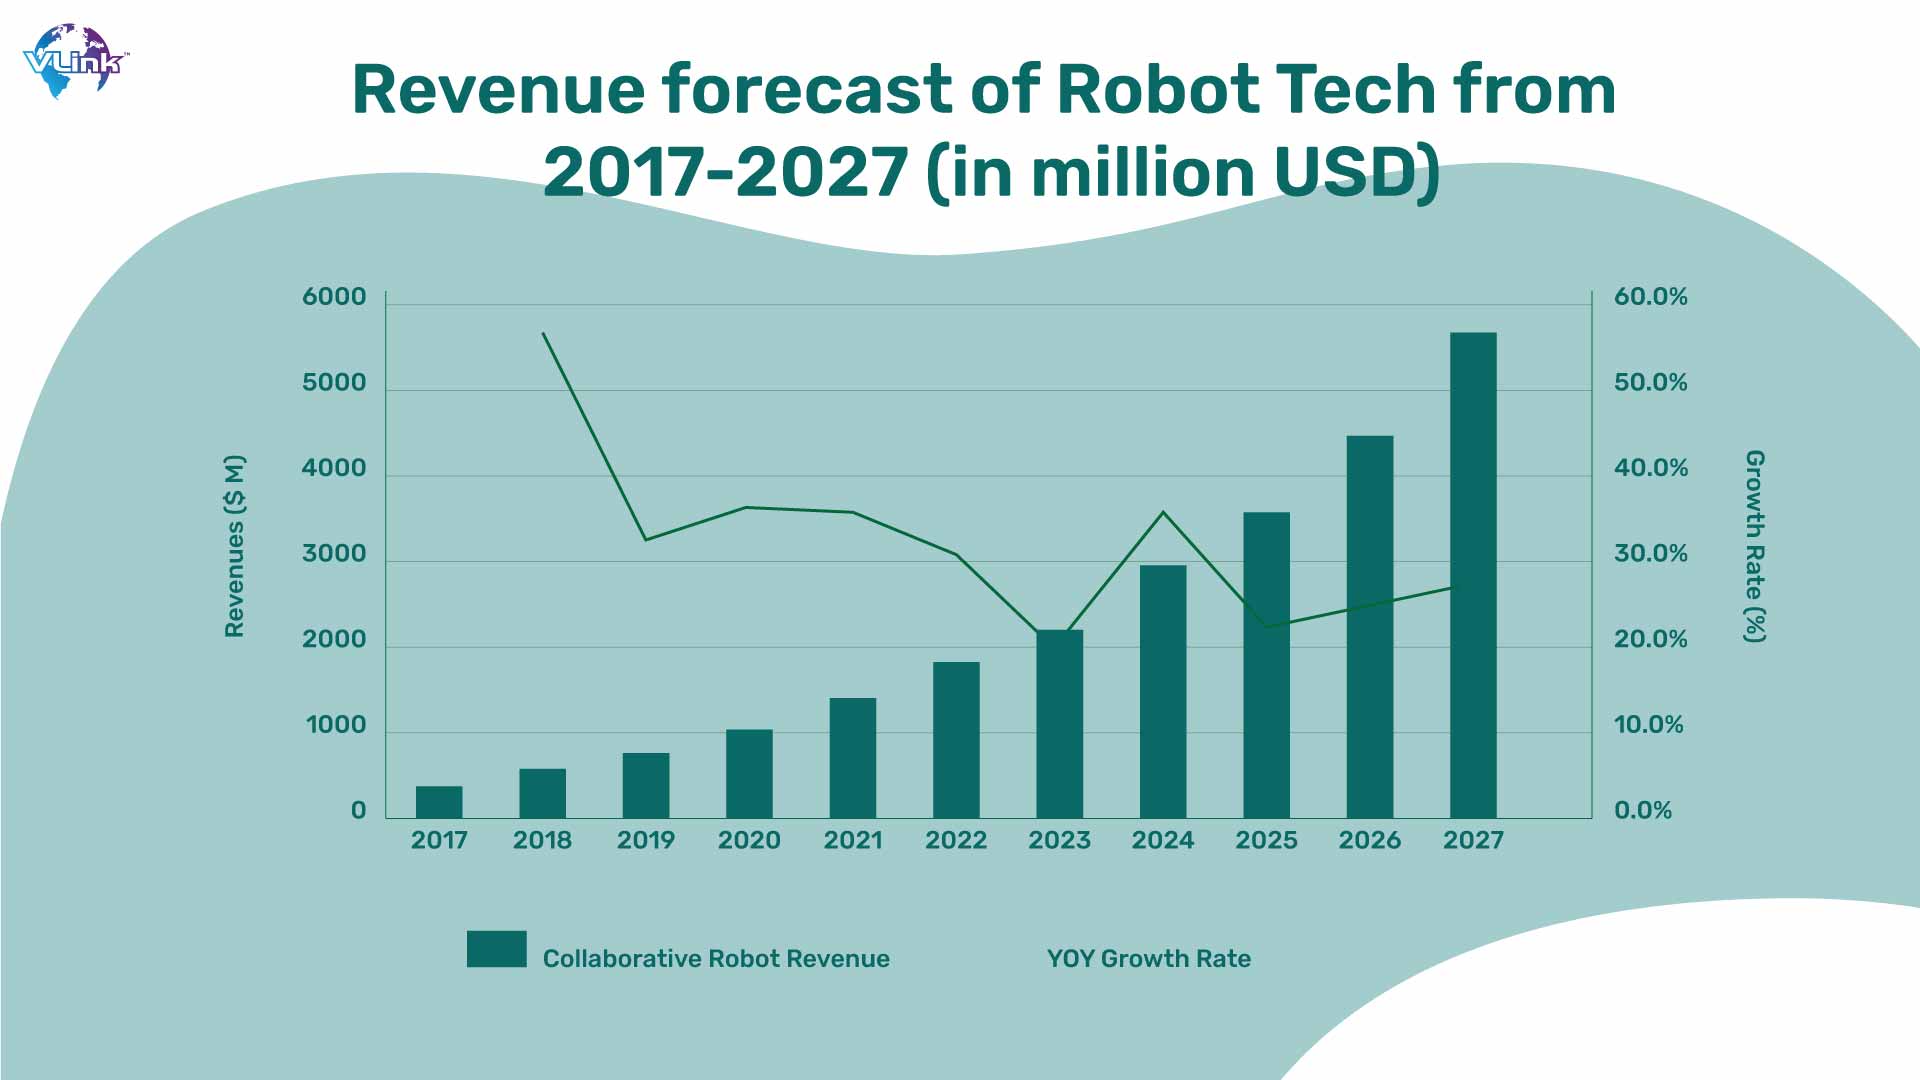 Revenue forecast of robot tech from 2017 to 2027